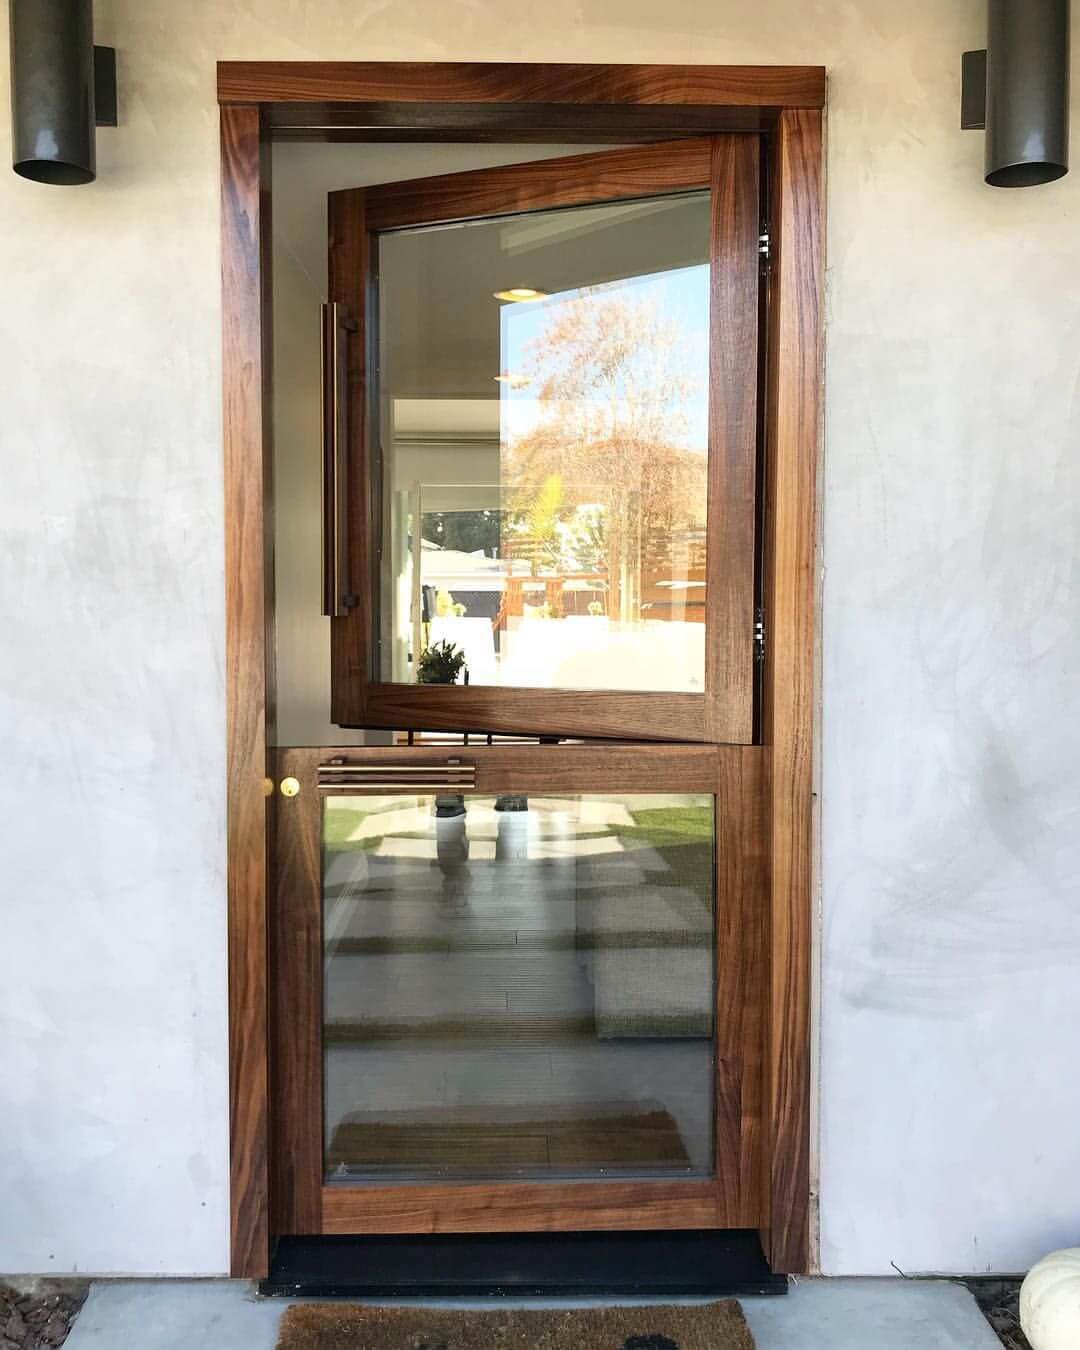 Photos Exterior Dutch Door With Window for Small Space